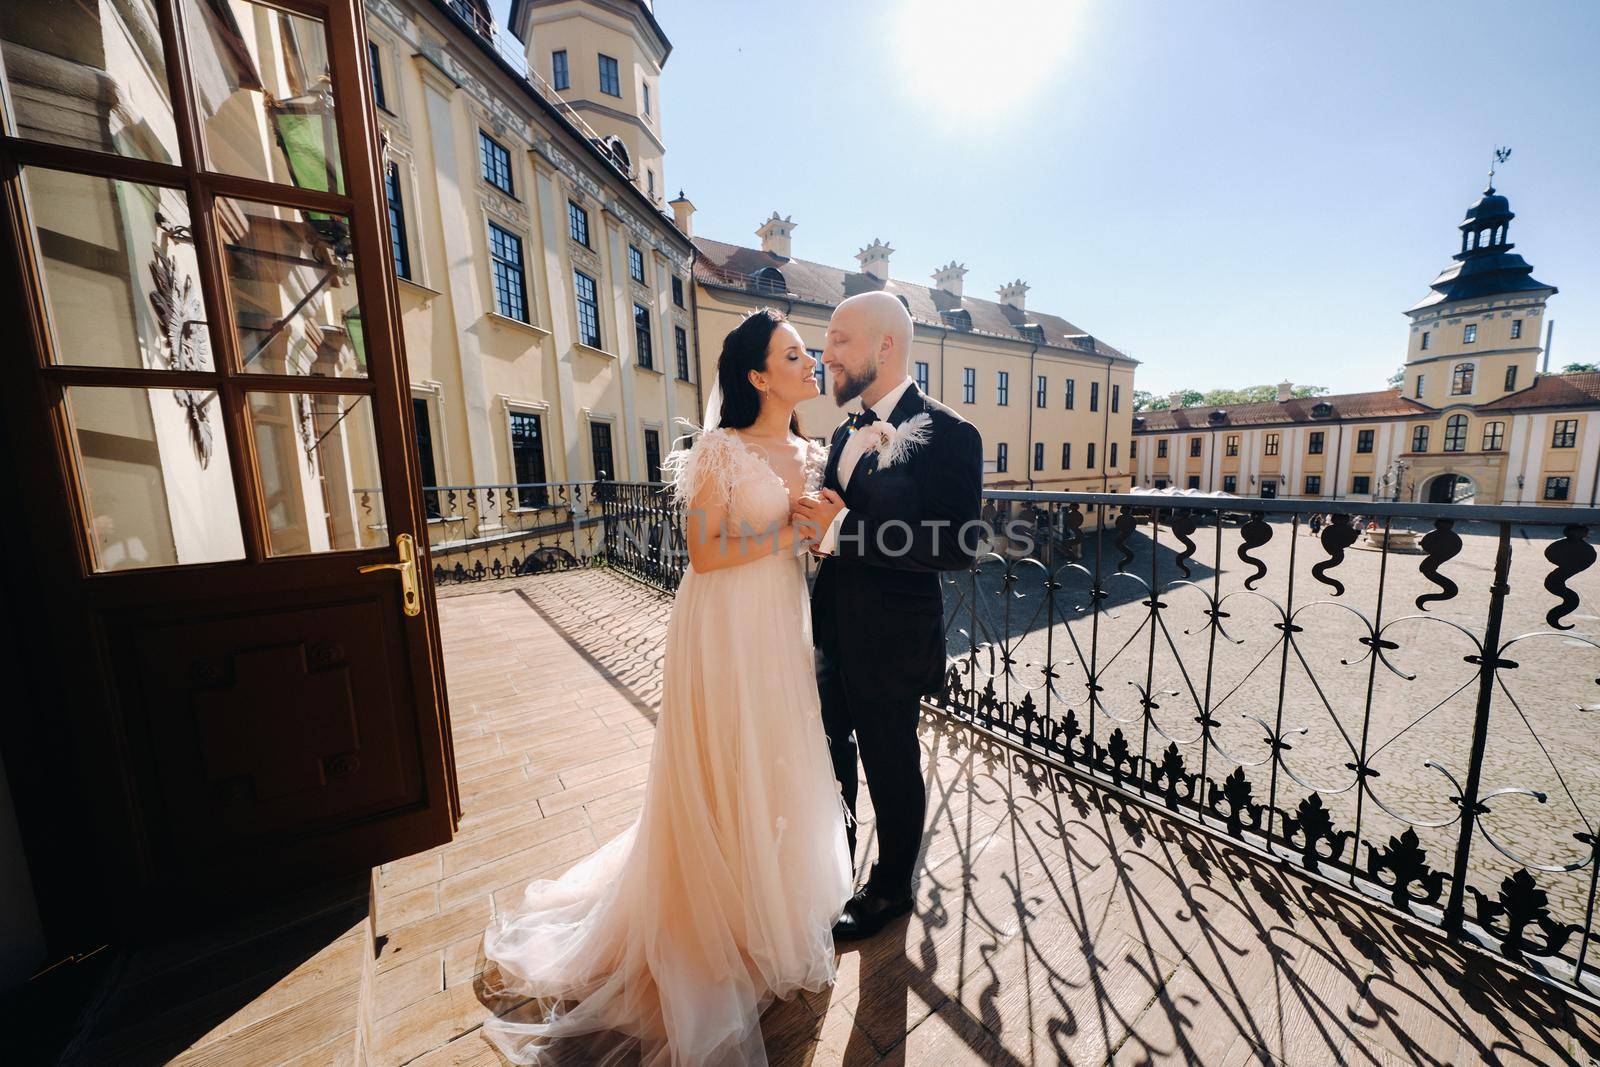 Elegant wedding couple on the balcony of an old castle in the city of Nesvizh.